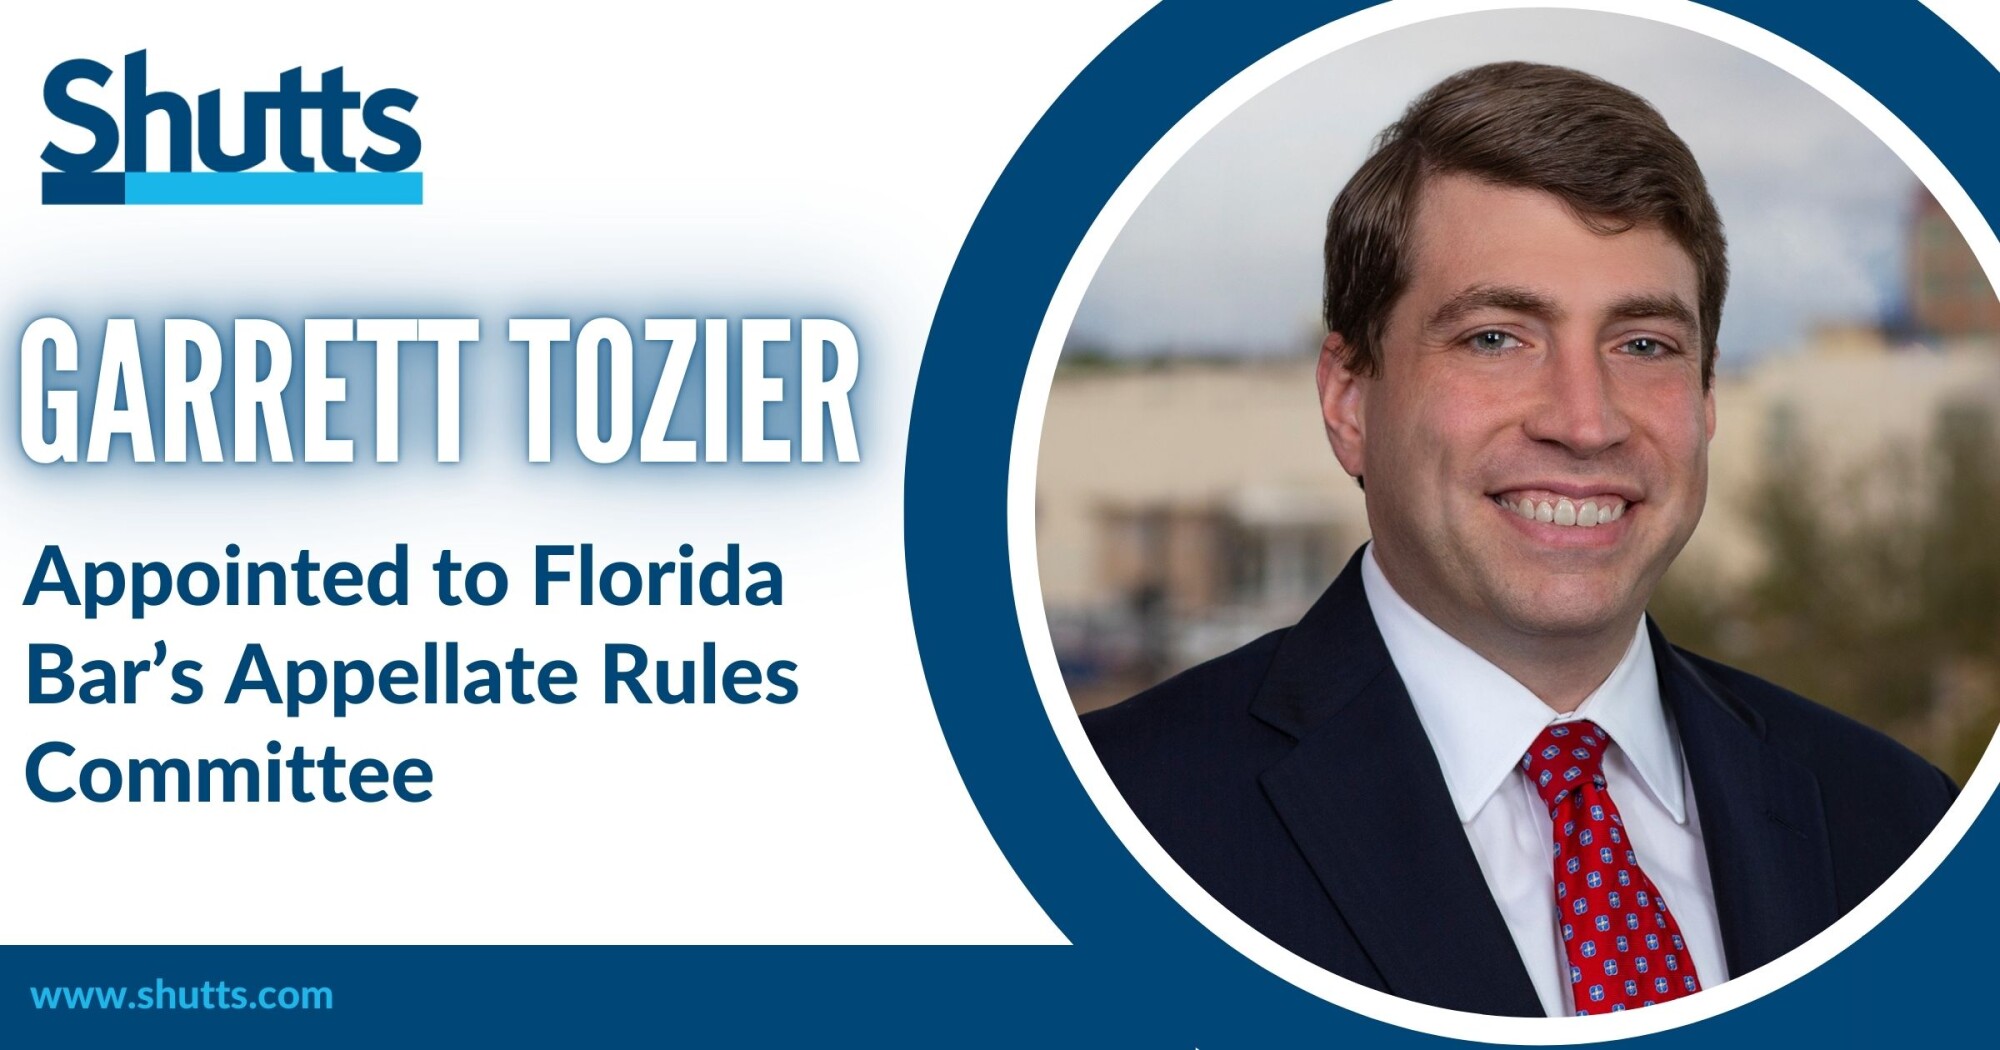 Garrett Tozier Appointed to Florida Bar’s Appellate Court Rules Committee